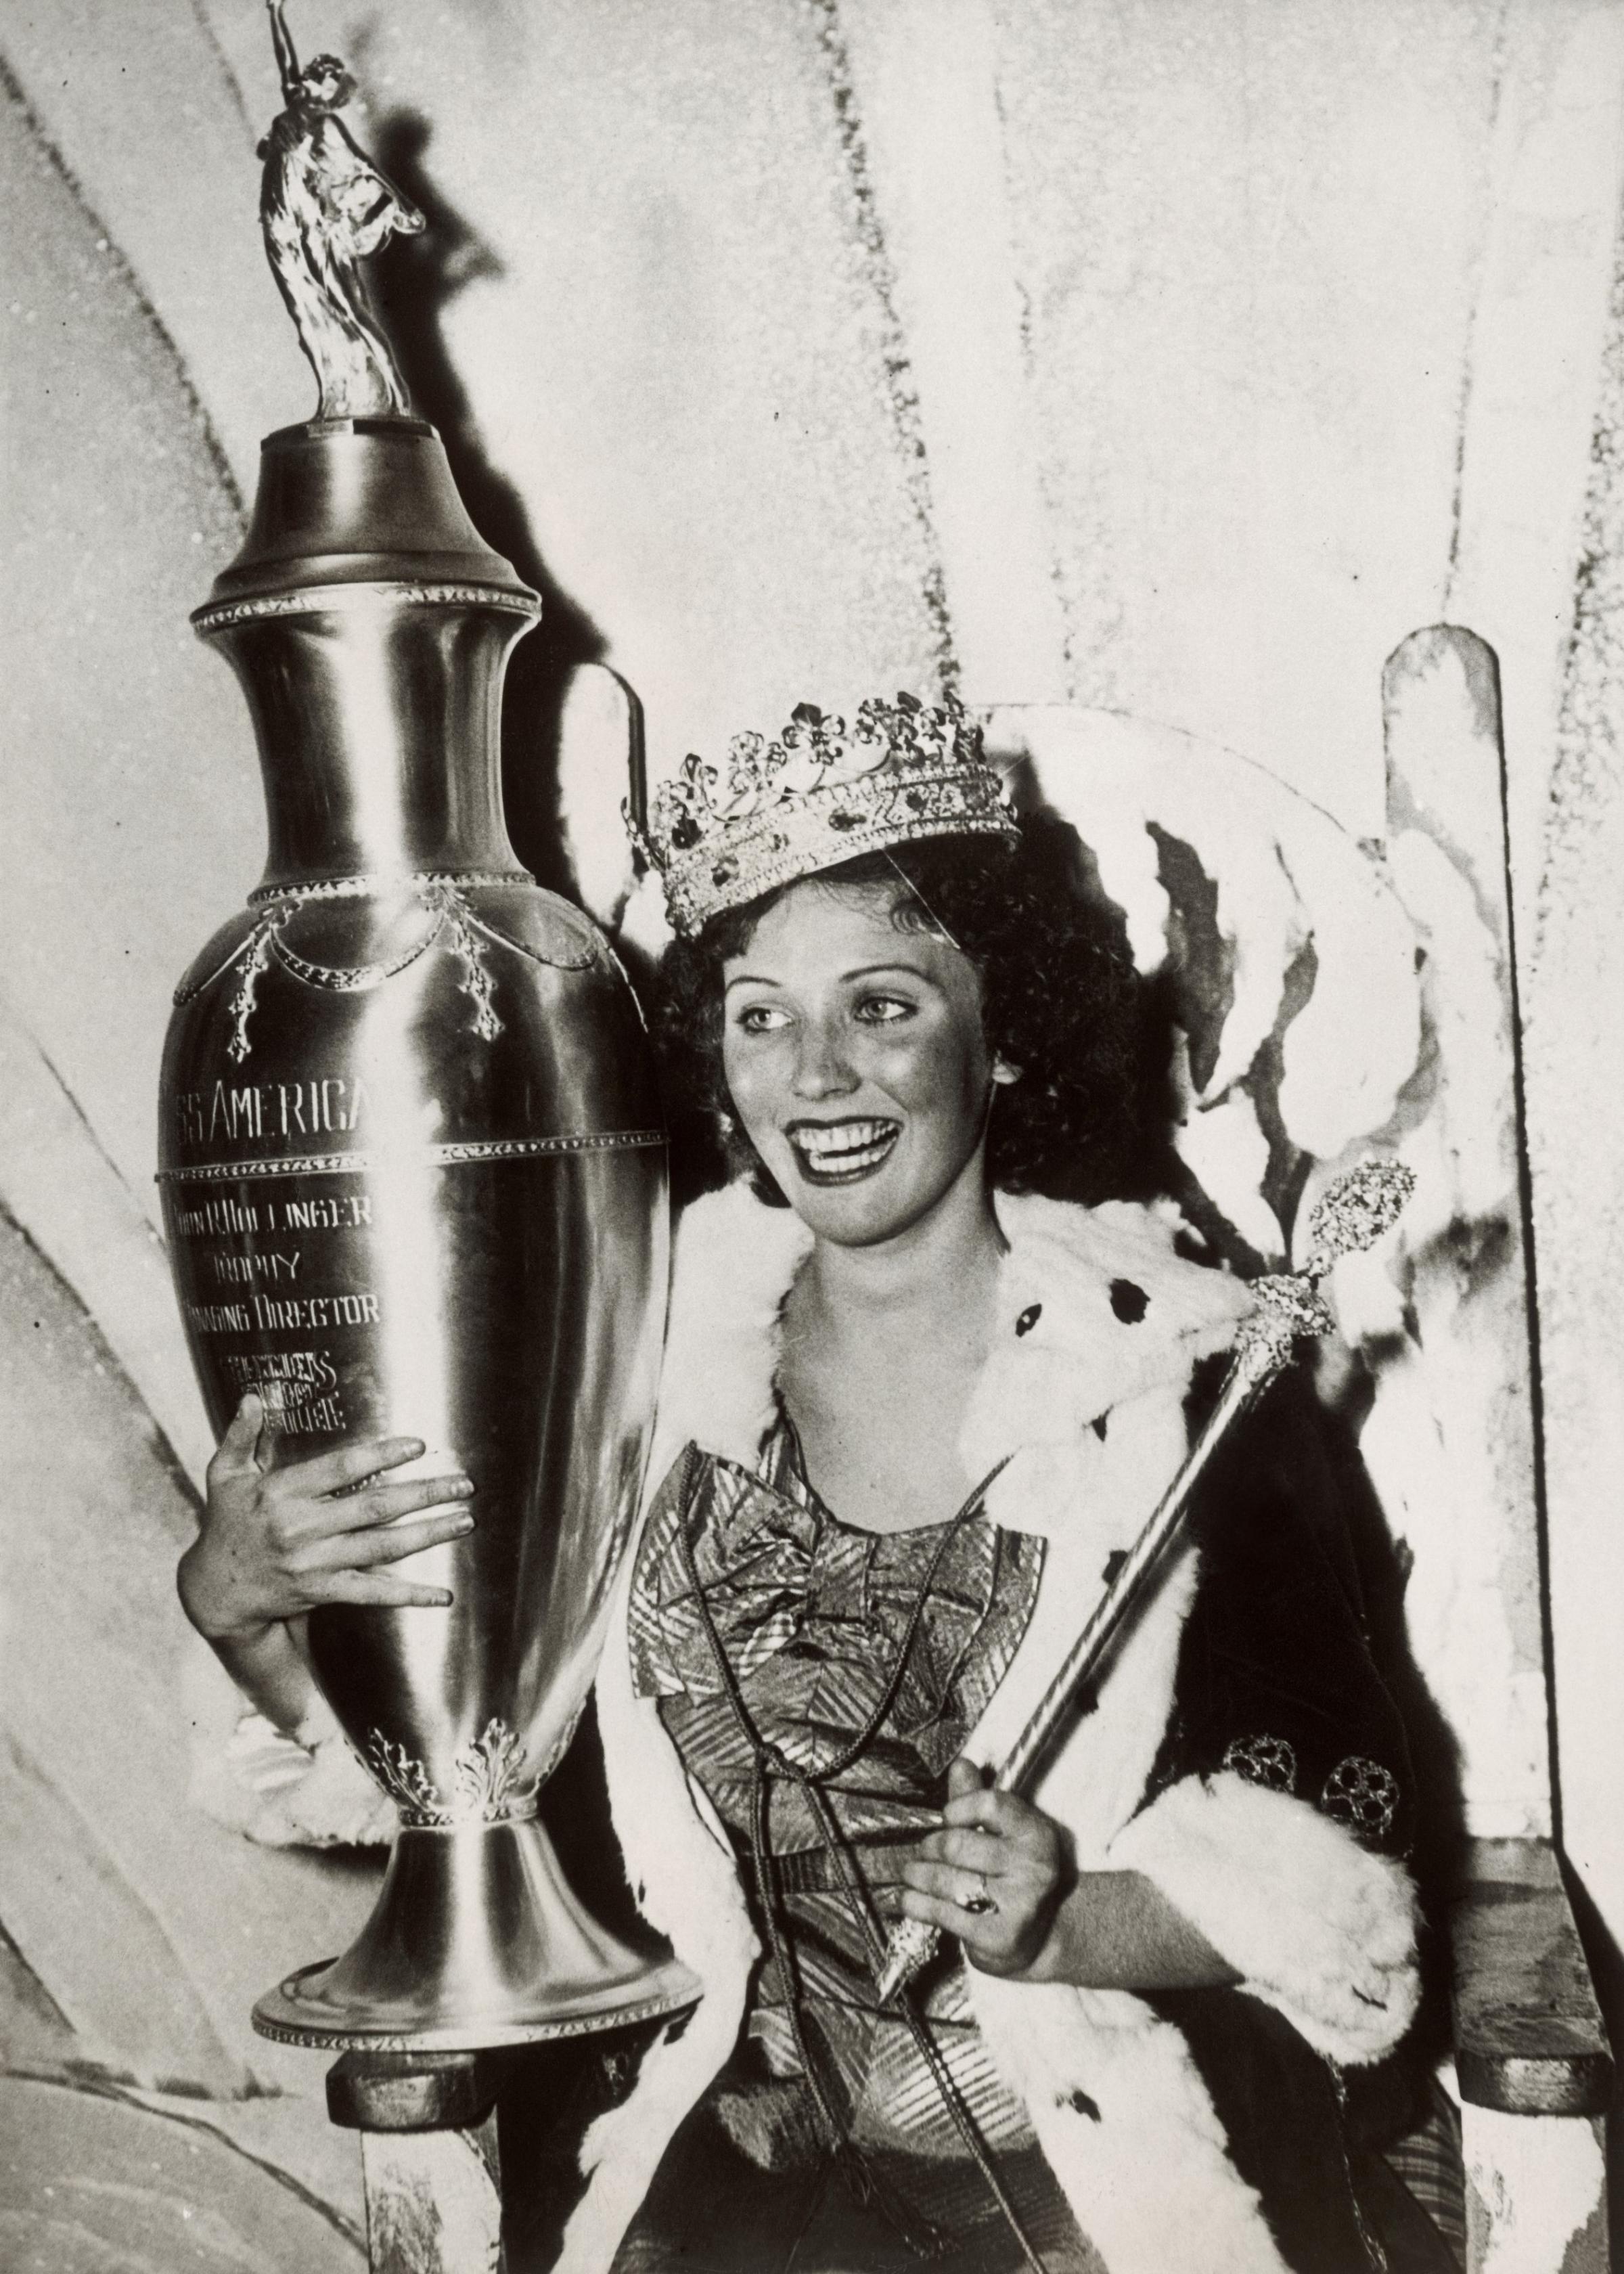 Miss America competition: The acting Miss Pittsburgh of 1935 Henrietta Leaver won beauty competition and is the new Miss America. Atlantic City. USA. Photograph. 17 September, 1935.  (Photo by Austrian Archives (AA)